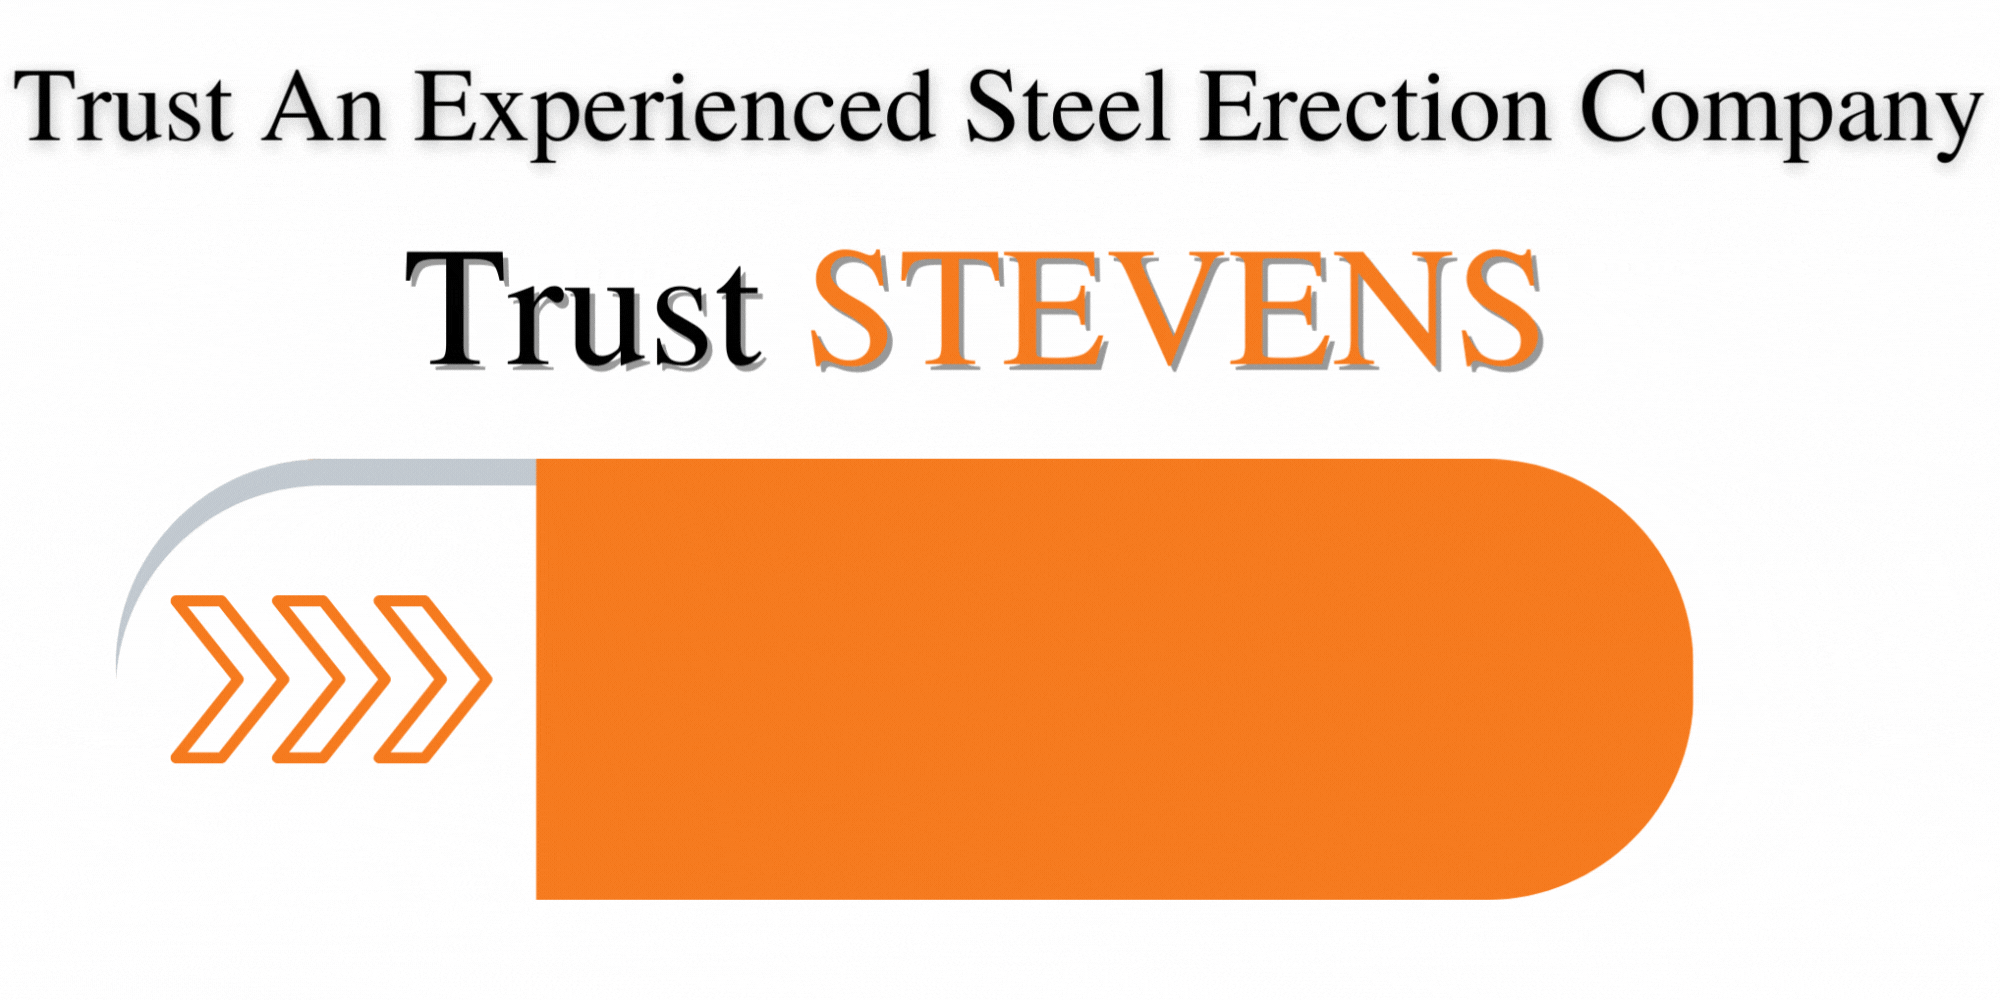 Get Your Steel Erection Quote